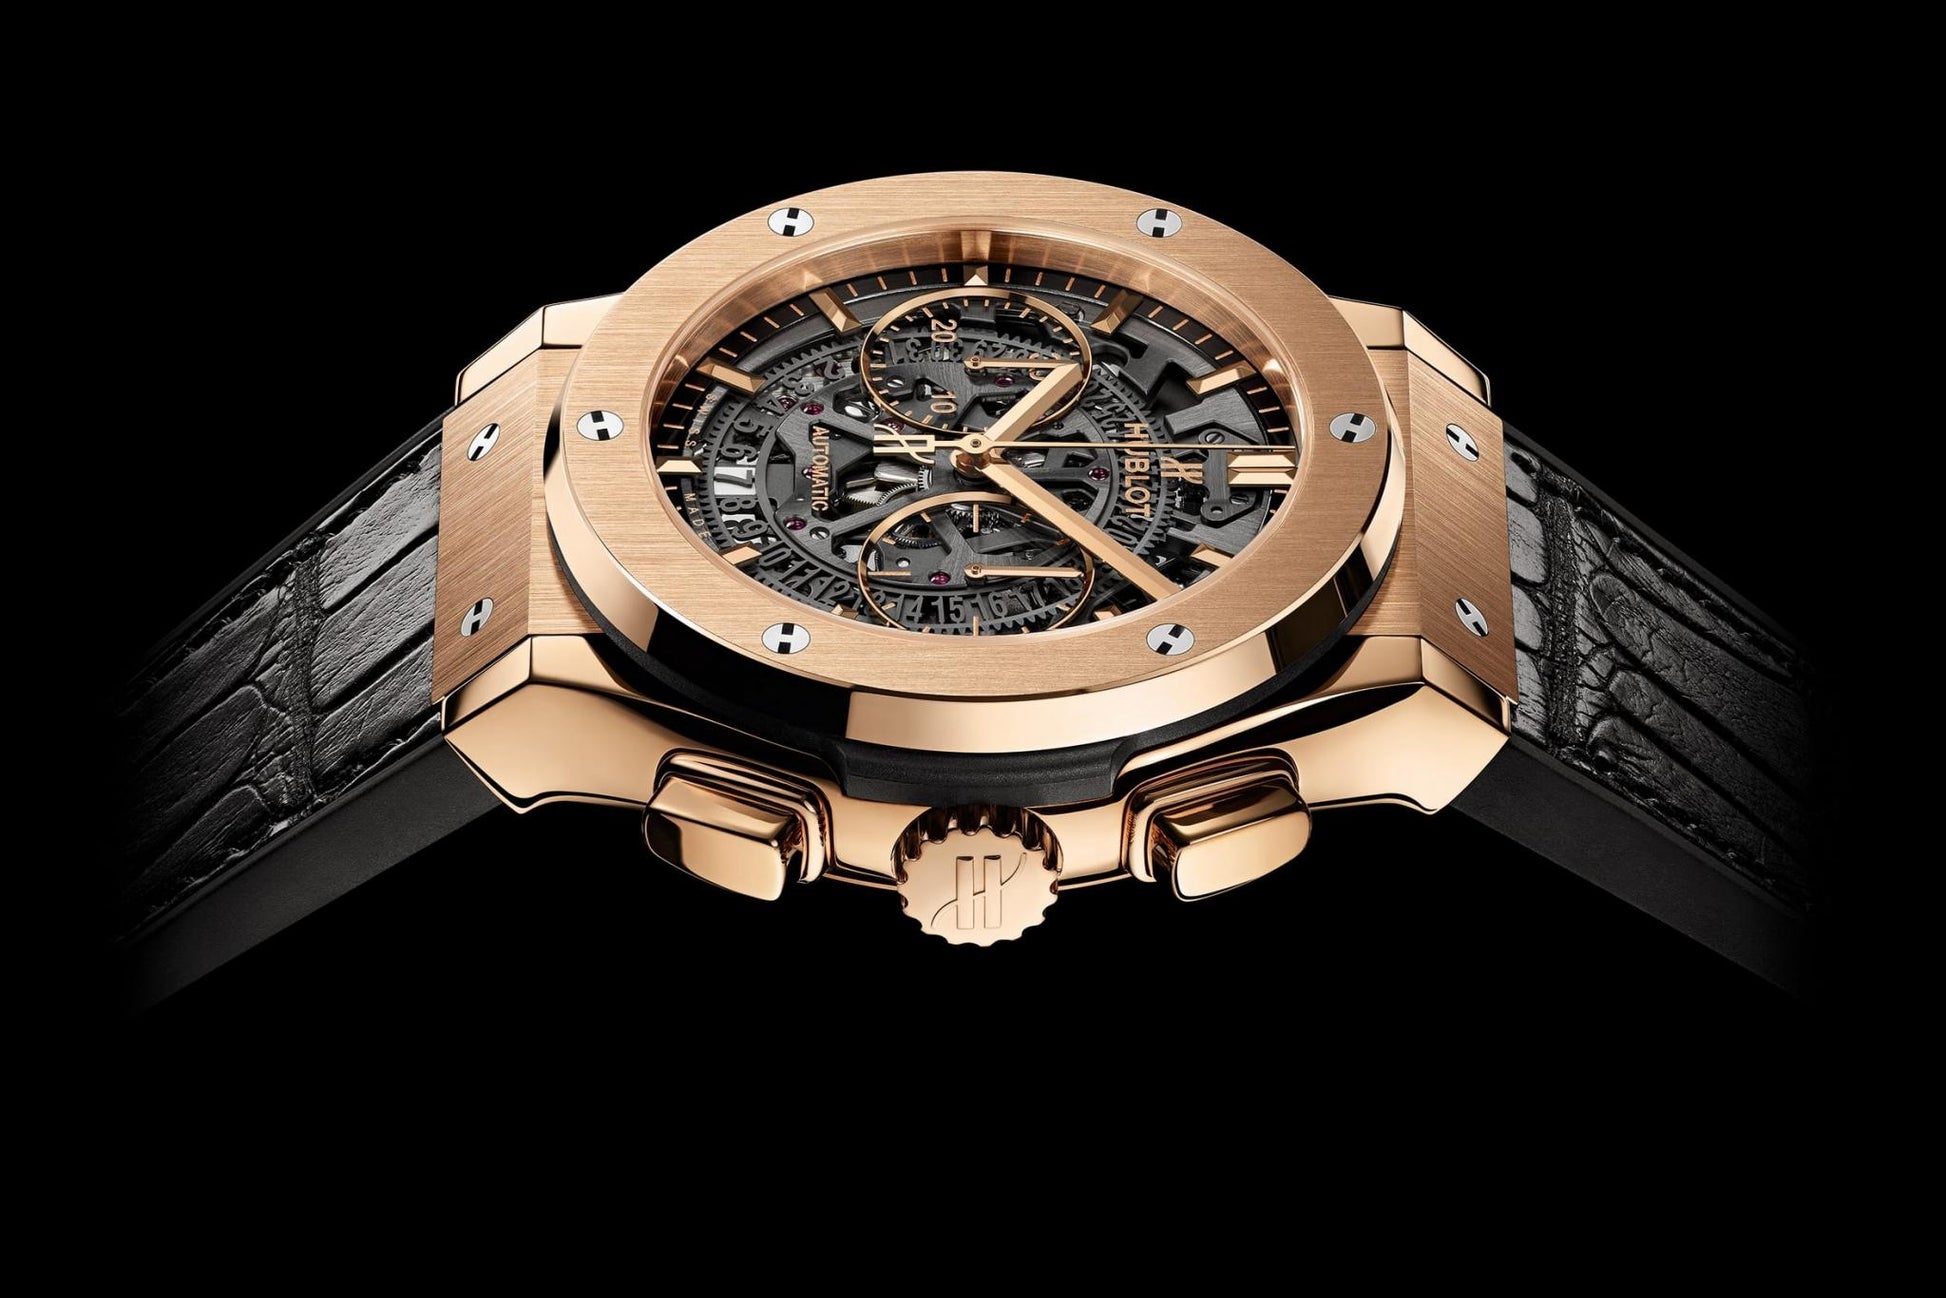 Hublot Classic Fusion Aerofusion King Gold Chronograph 45mm, Ref# 525.OX.0180.LR, Crown and Buttons